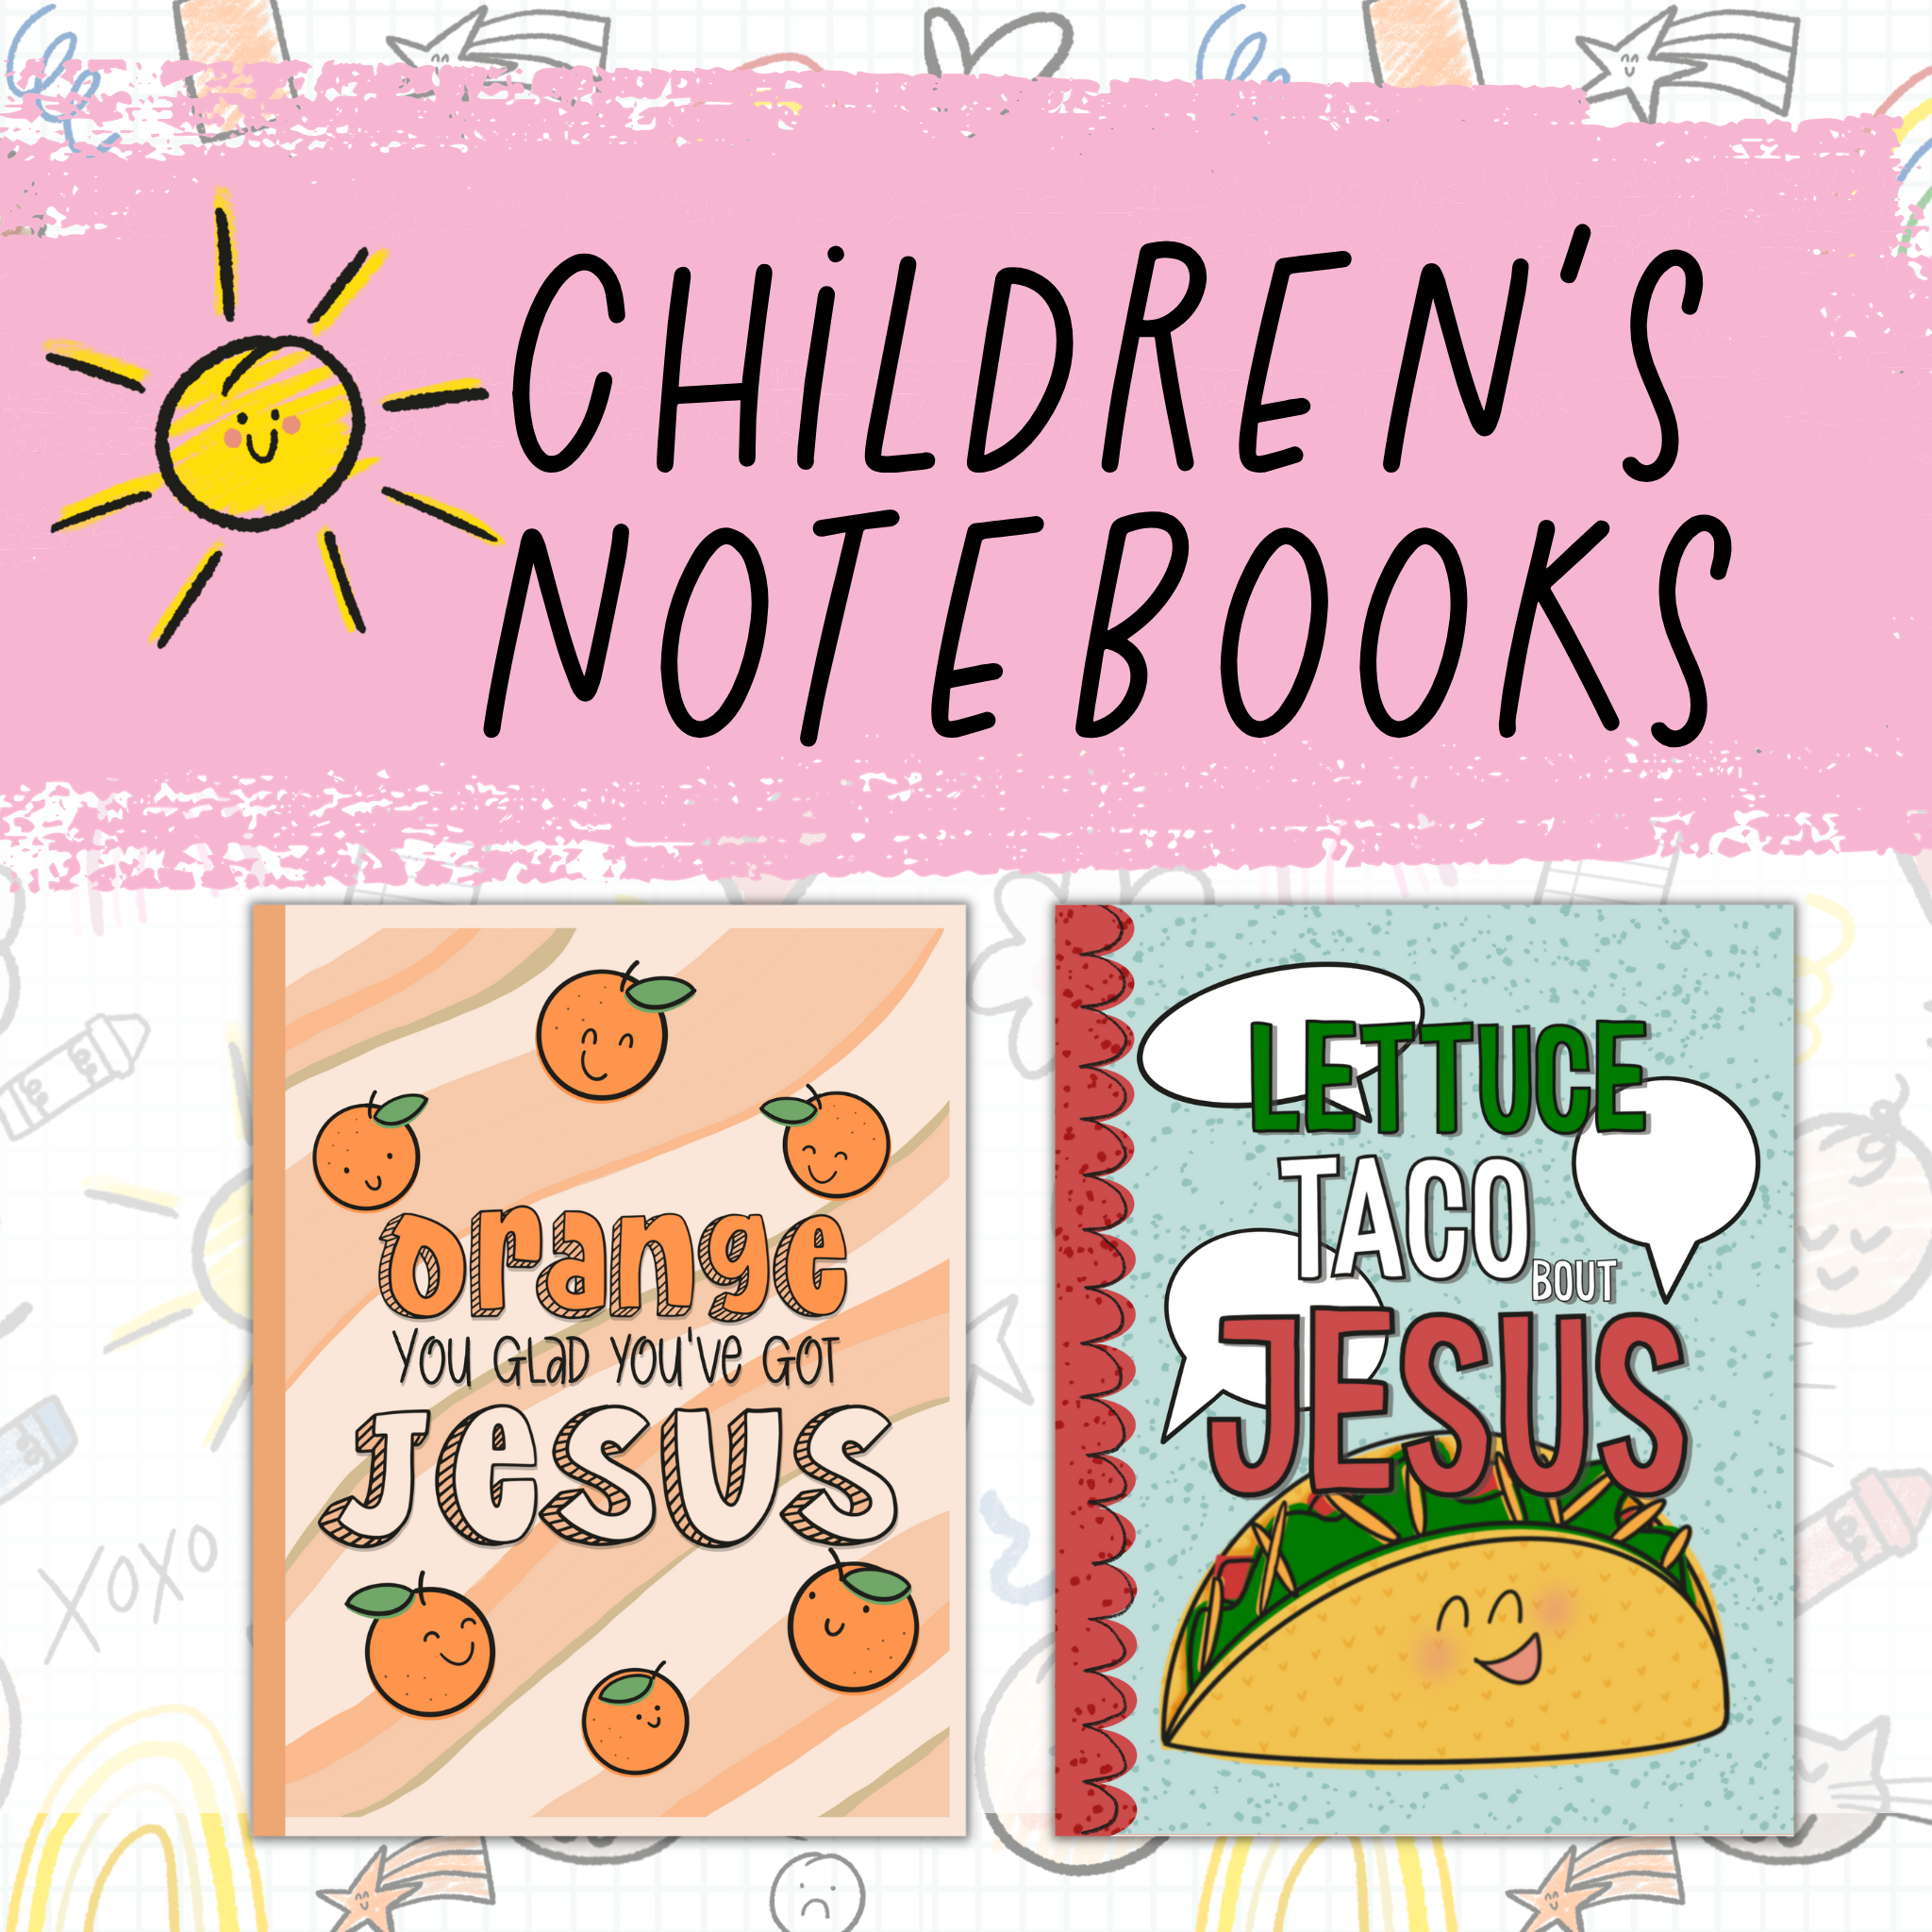 o	Button representing a variety of children’s notebooks created on Kindle Direct Publishing by self published author and illustrator Lindsay Dain.